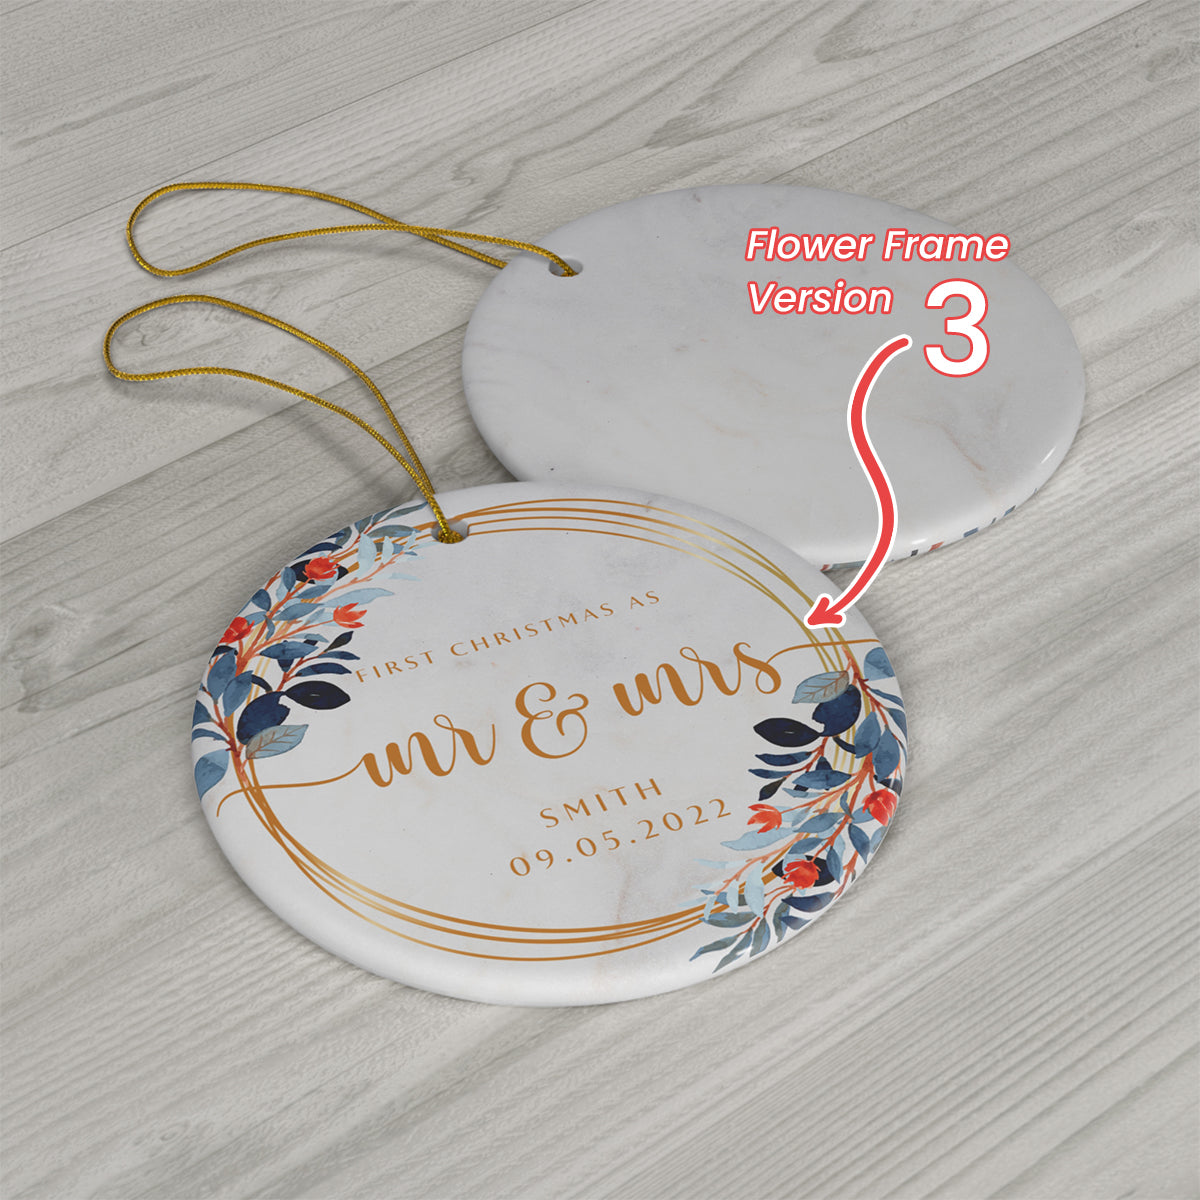 Mr and Mrs Christmas Ornament - First Christmas Married Ornament - Our First Christmas Married as Mr and Mrs Ornament - Floral Border Ornament - Personalized